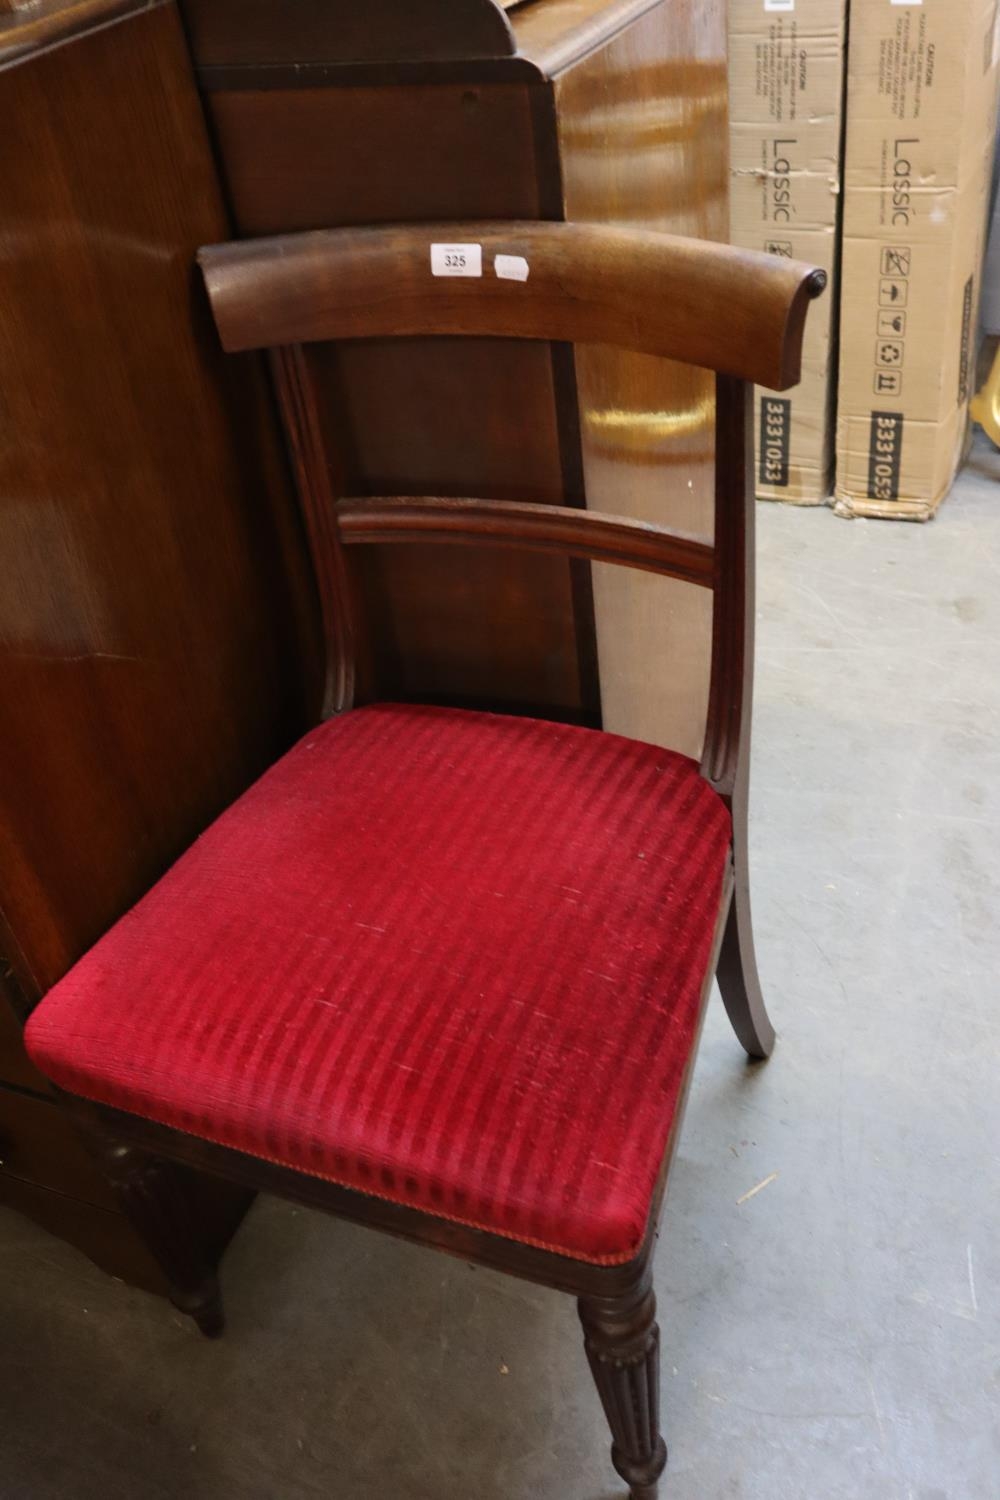 MAHOGANY SINGLE CHAIR, HAVING RED UPHOLSTERED SEAT